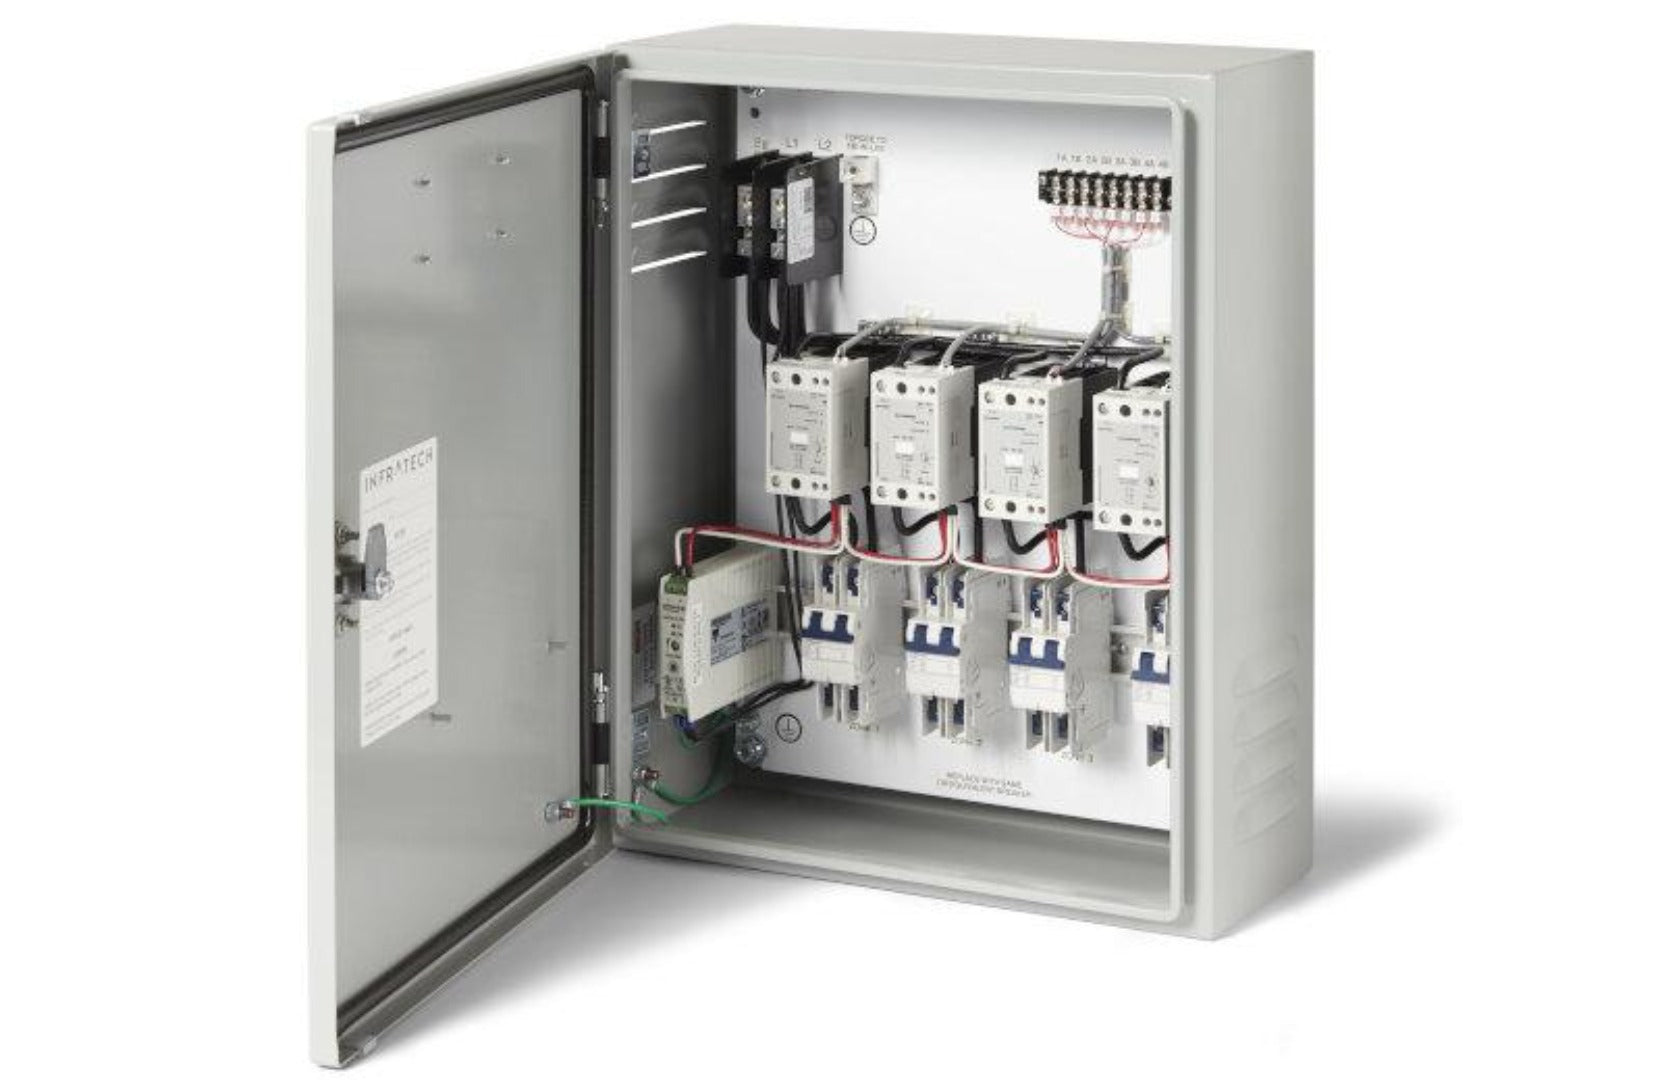 Infratech Home Management System Panels